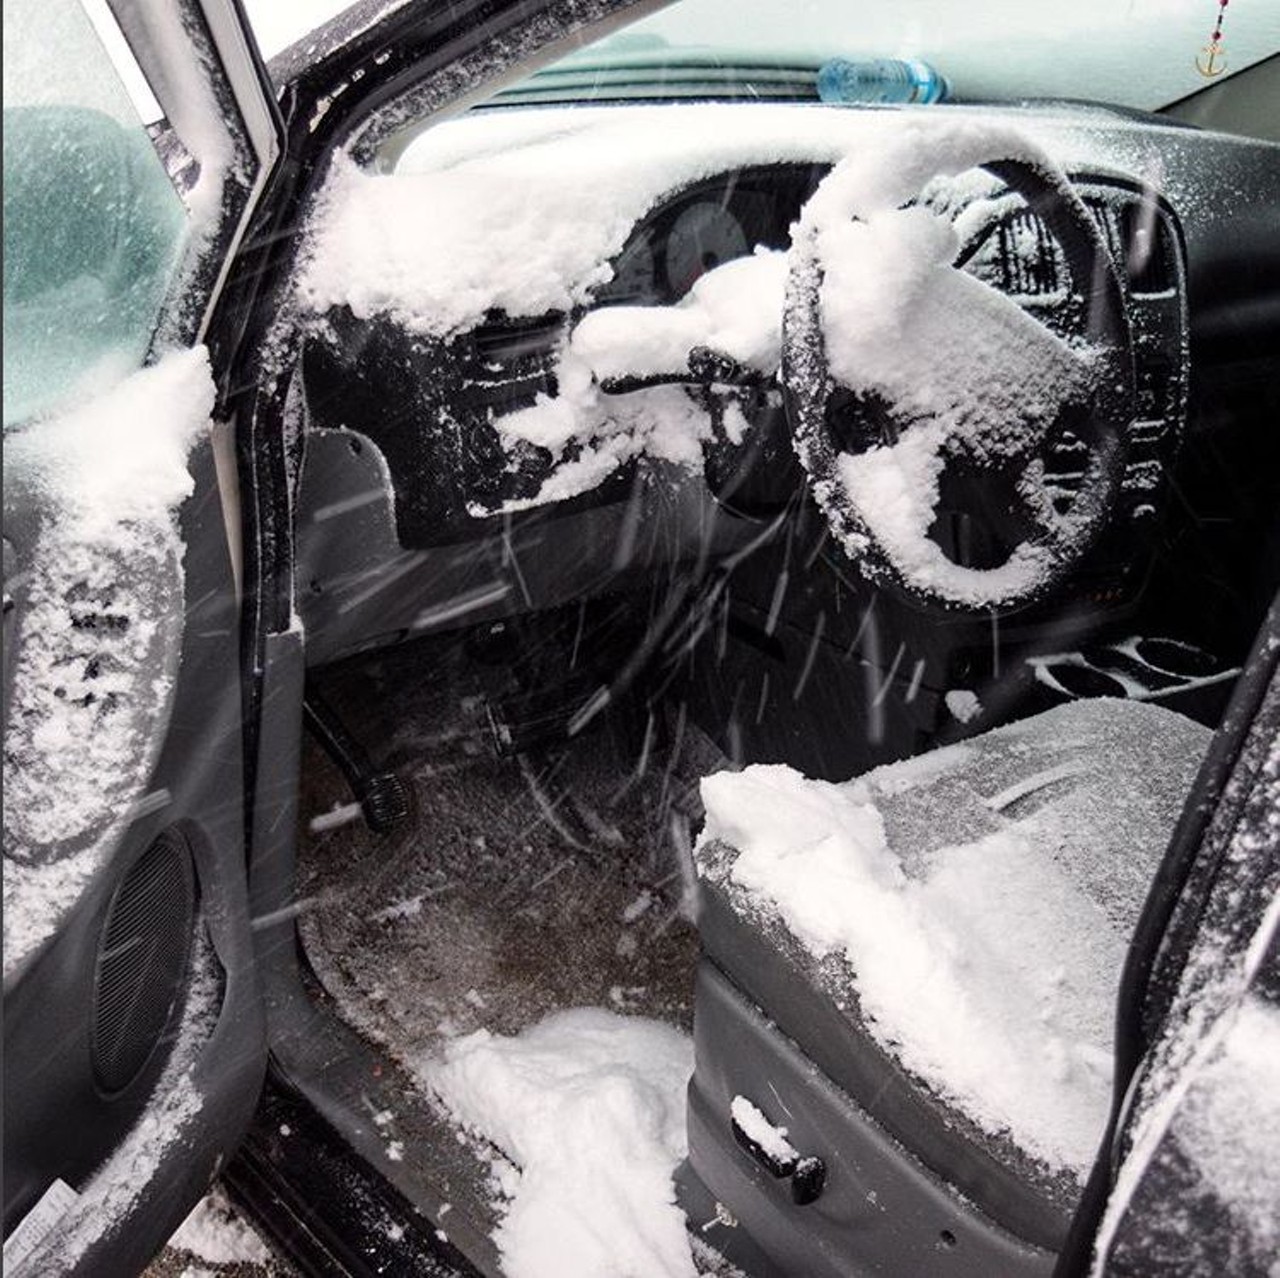  Snow covering your seat when you open the car door    
You have to open door to get the scraper, but if you open your door snow falls all over your seat &#151; see the problem? It's an unavoidable issue.
Photo via  Instagram, user eric.deschamps.photographie 